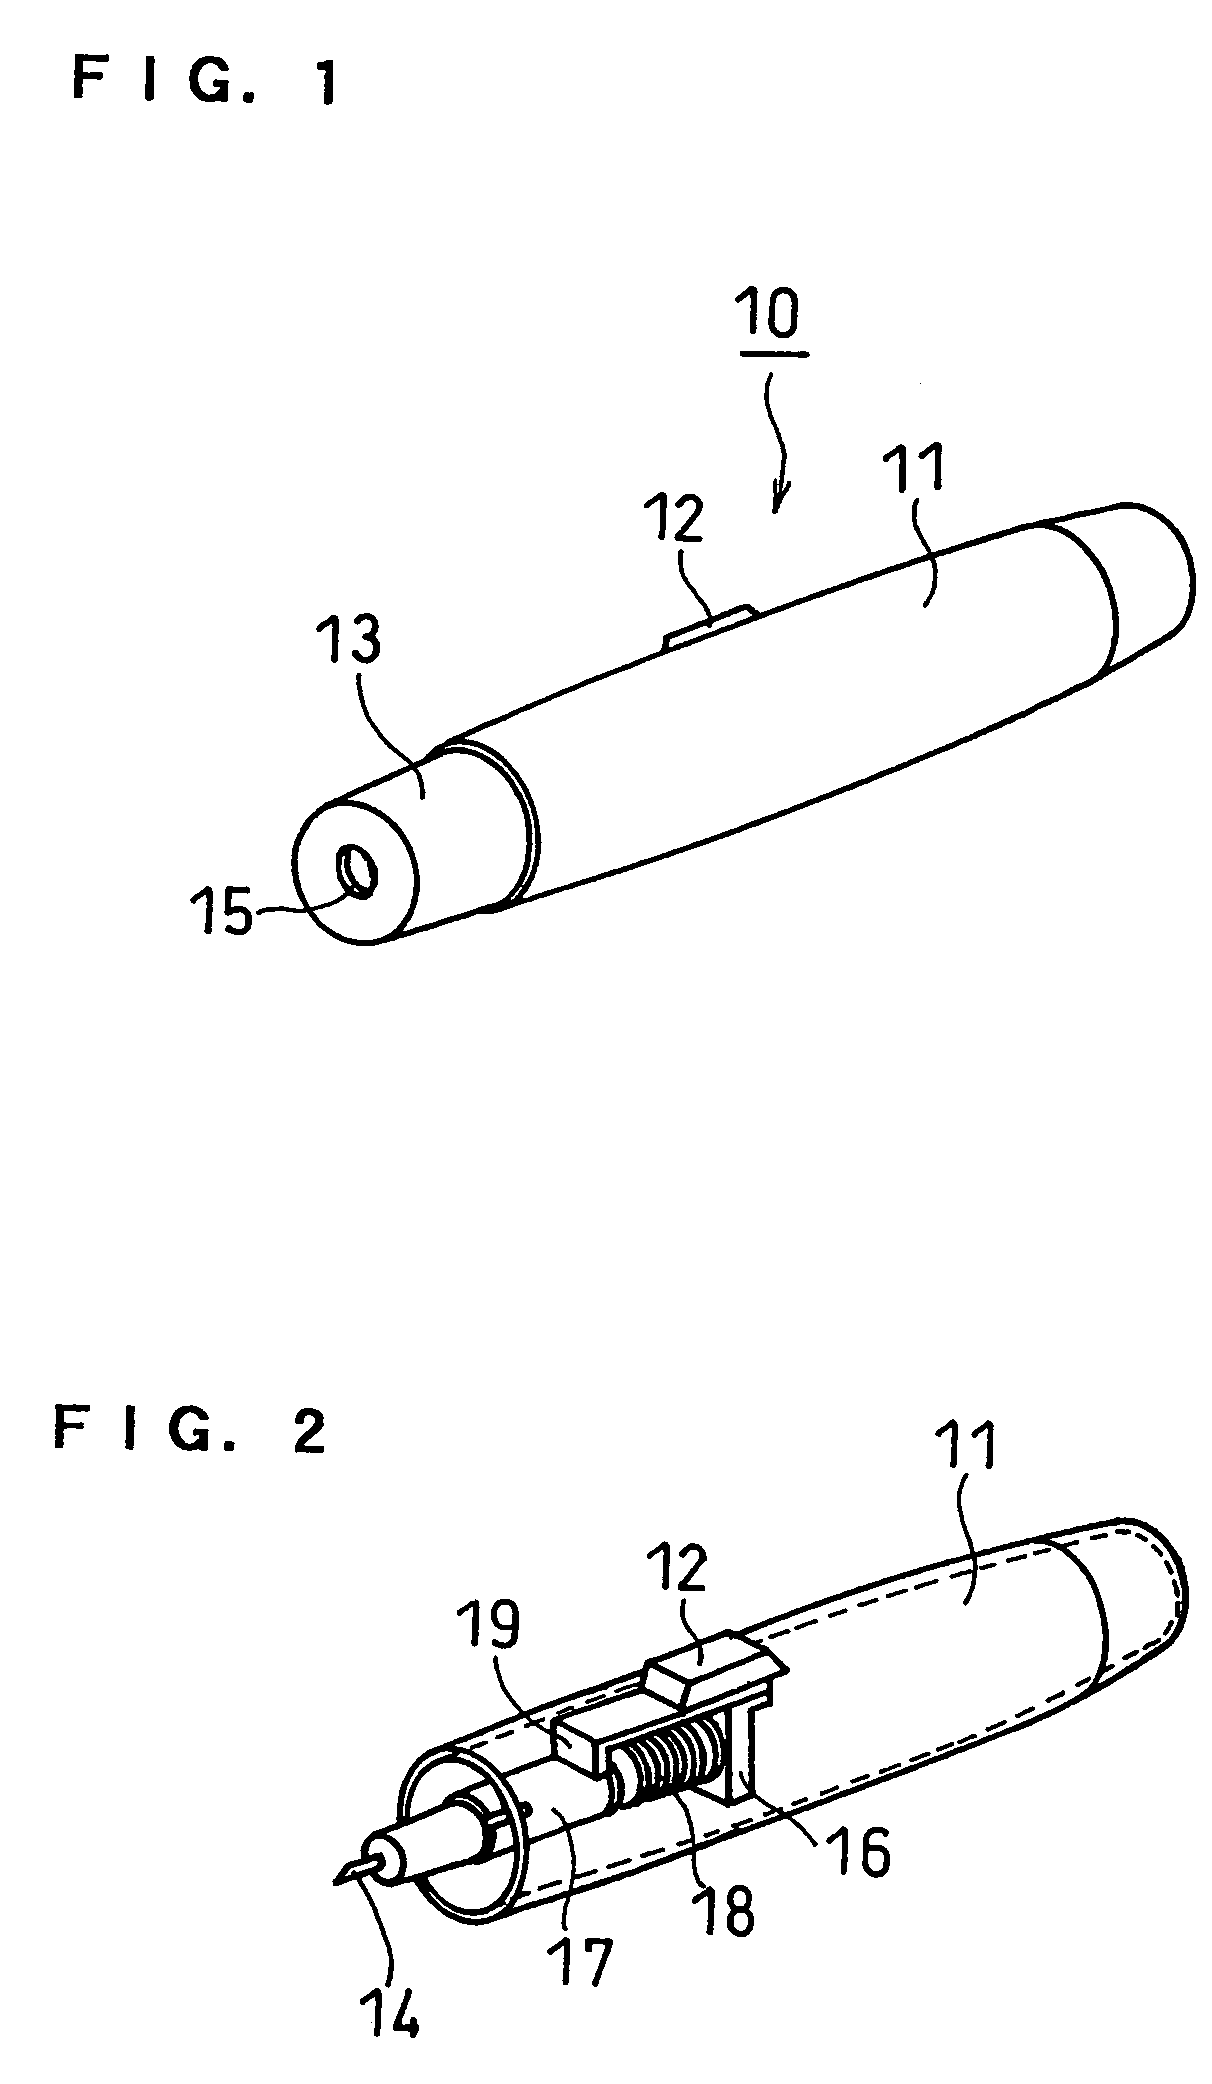 Body fluid measuring adapter and body fluid measuring unit